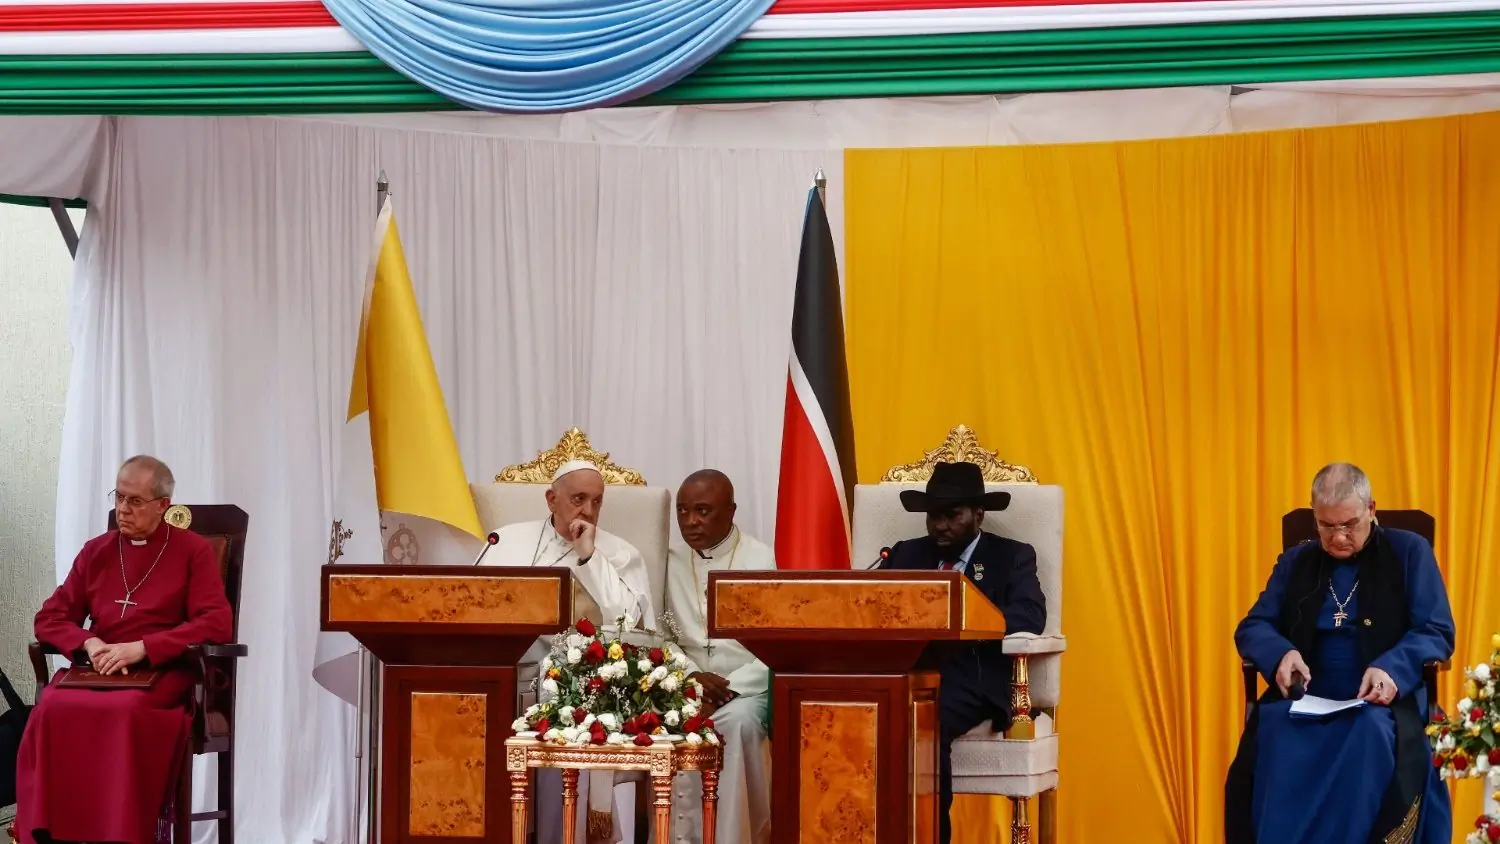 Archbishop Justin Welby, Pope Francis, President Salva Kiir Mayardit, and Rev. Iain Greenshields during the meeting with South Sudanese authorities in Juba